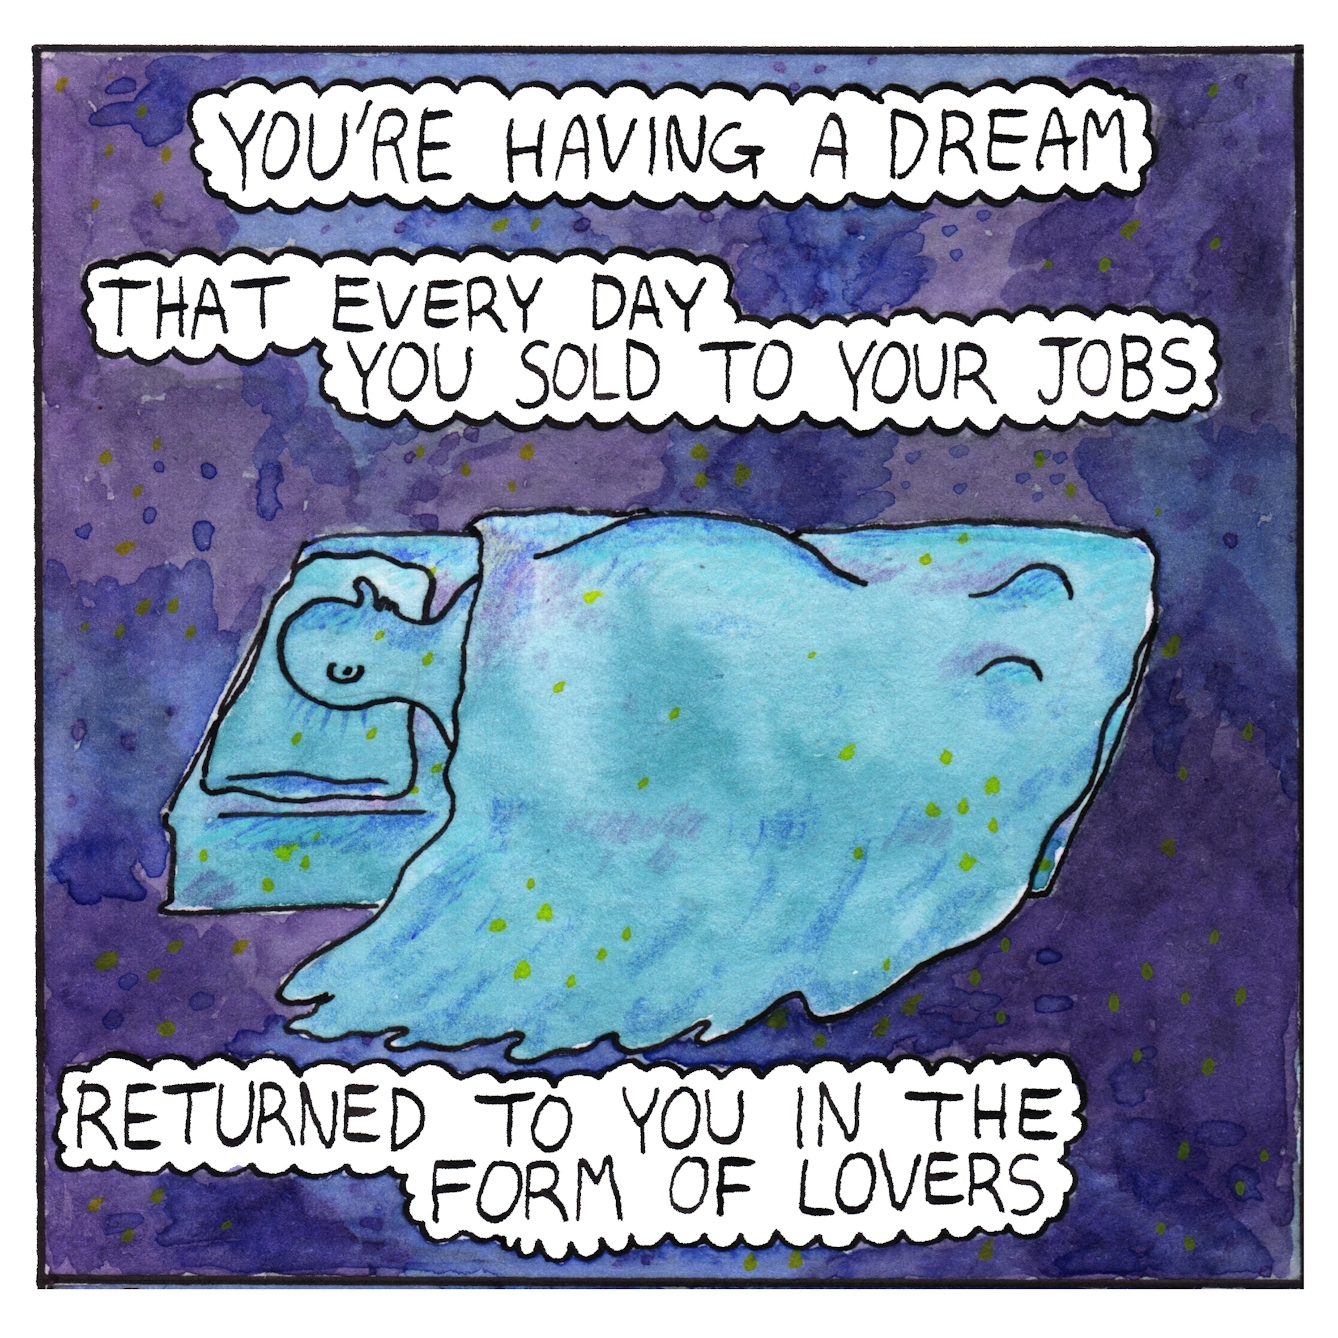 Panel one of a six-panel comic made with ink, watercolour and colour pencils: A deep purple/blue background with feint yellow dots gives a feeling of outer space. In the centre of the panel, a turquoise bed with a sleeping figure lying under bed clothes flies through the space. Bubbles of text read: “You’re having a dream that every day you sold to your jobs, returned to you in the form of lovers”